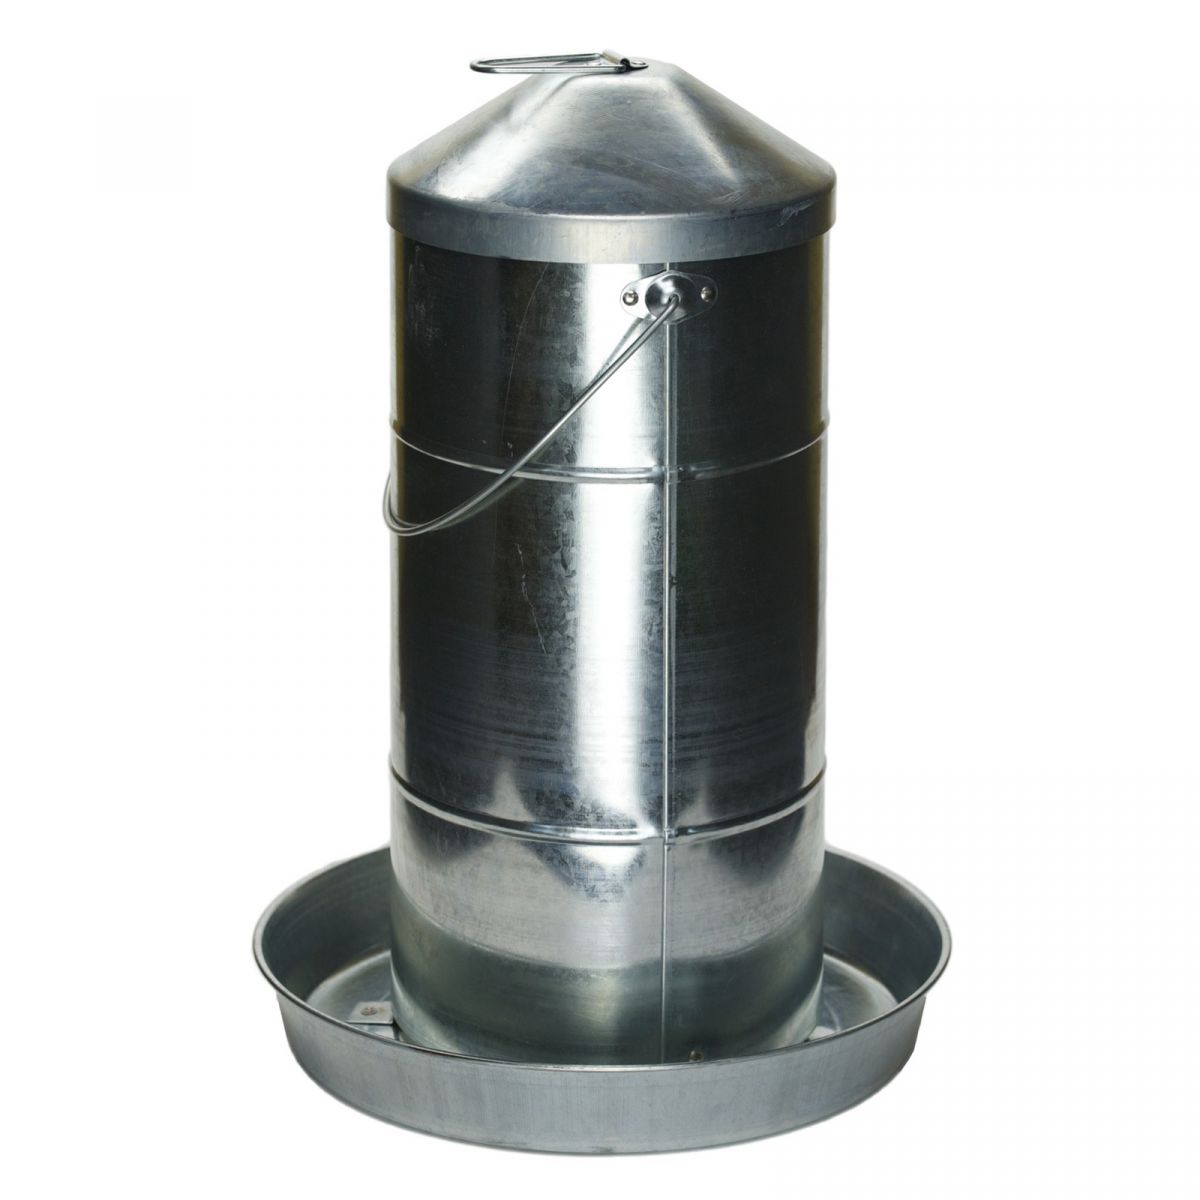 Galvanised poultry feeder